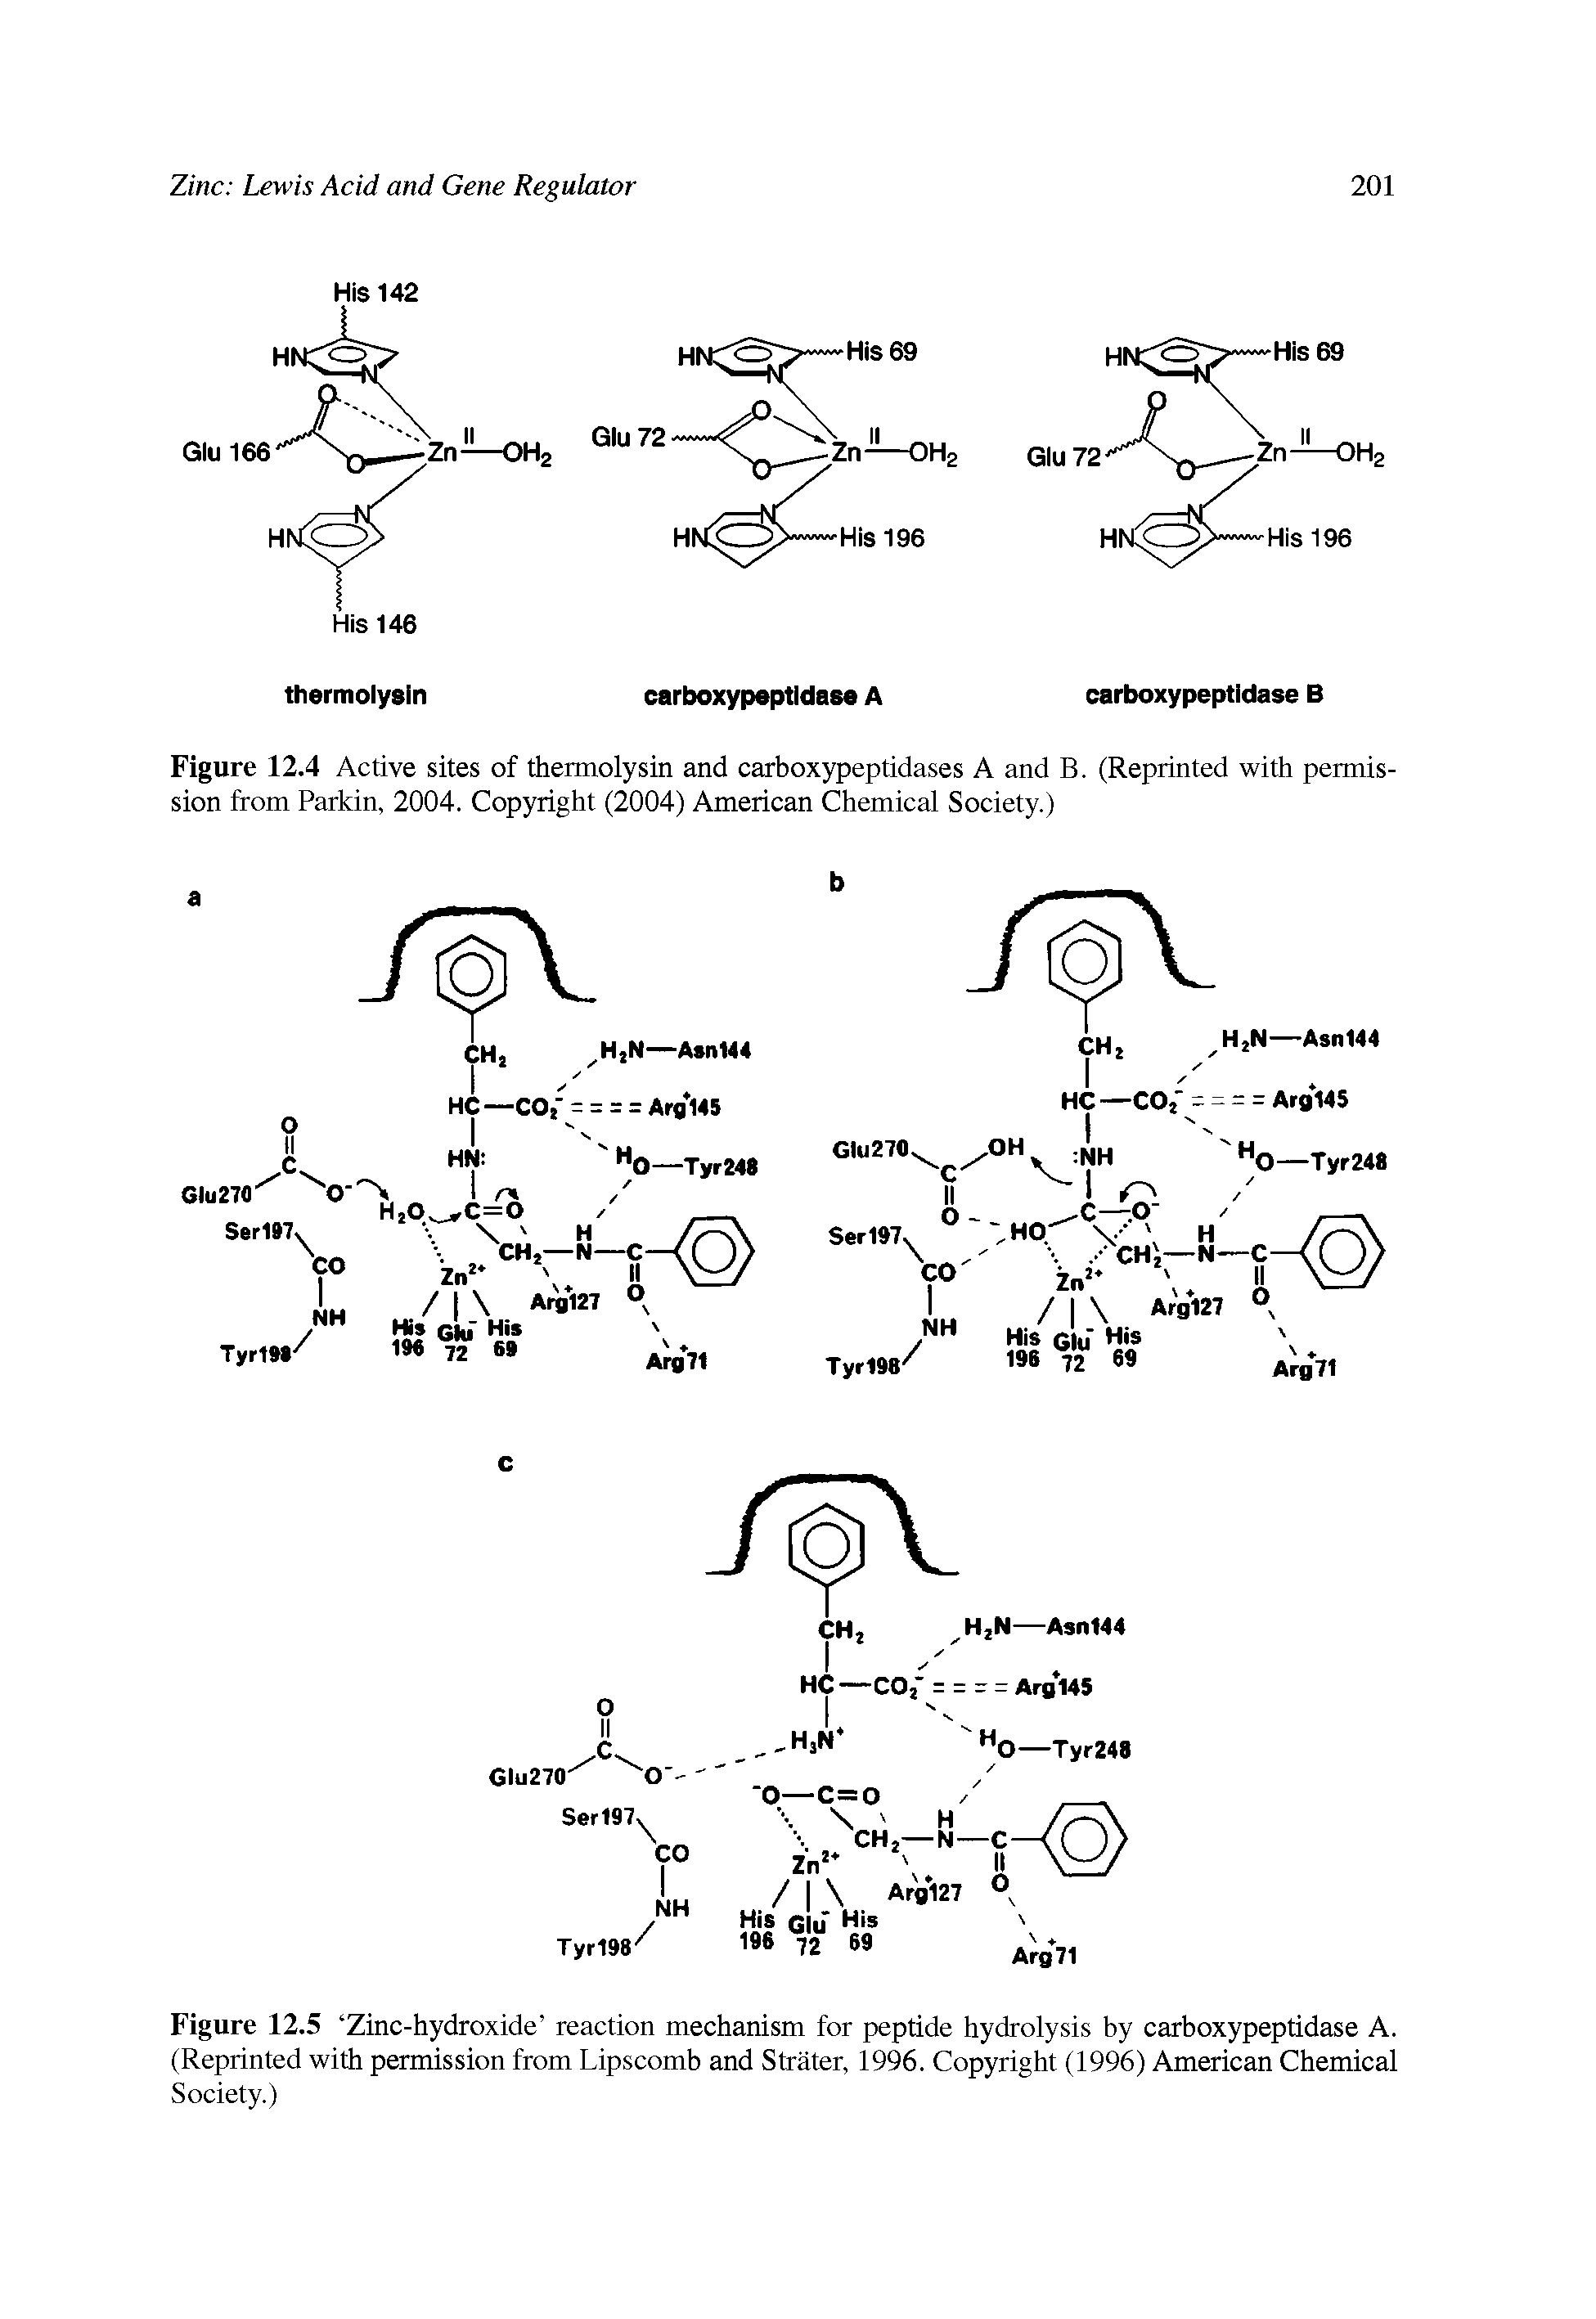 Figure 12.5 Zinc-hydroxide reaction mechanism for peptide hydrolysis by carboxypeptidase A. (Reprinted with permission from Lipscomb and Strater, 1996. Copyright (1996) American Chemical Society.)...